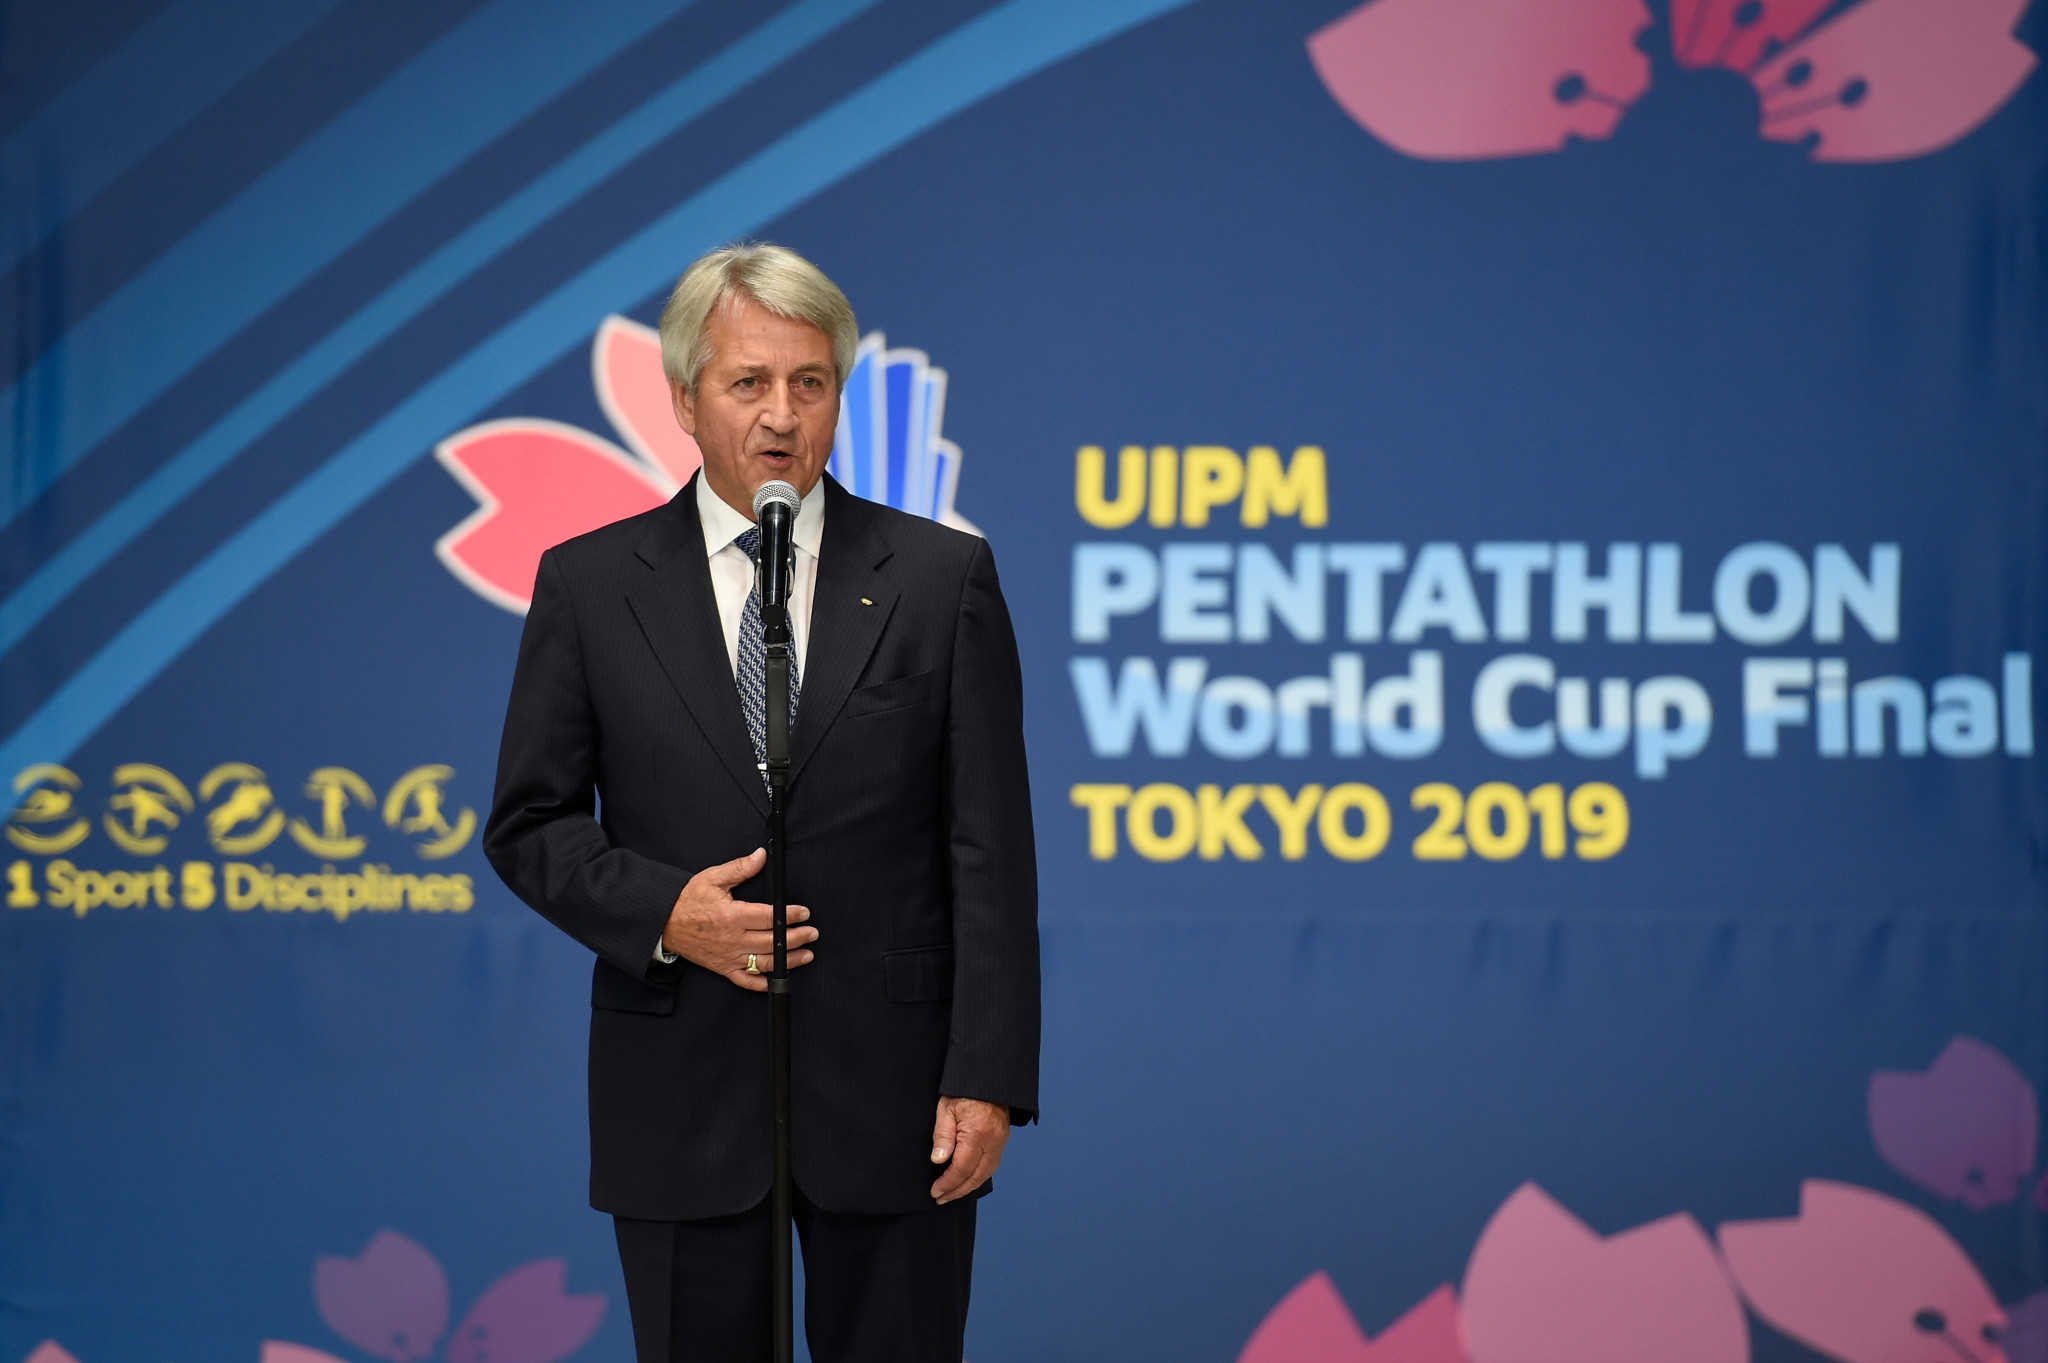 UIPM President claims 90-minute format proposed for Paris 2024 will boost popularity